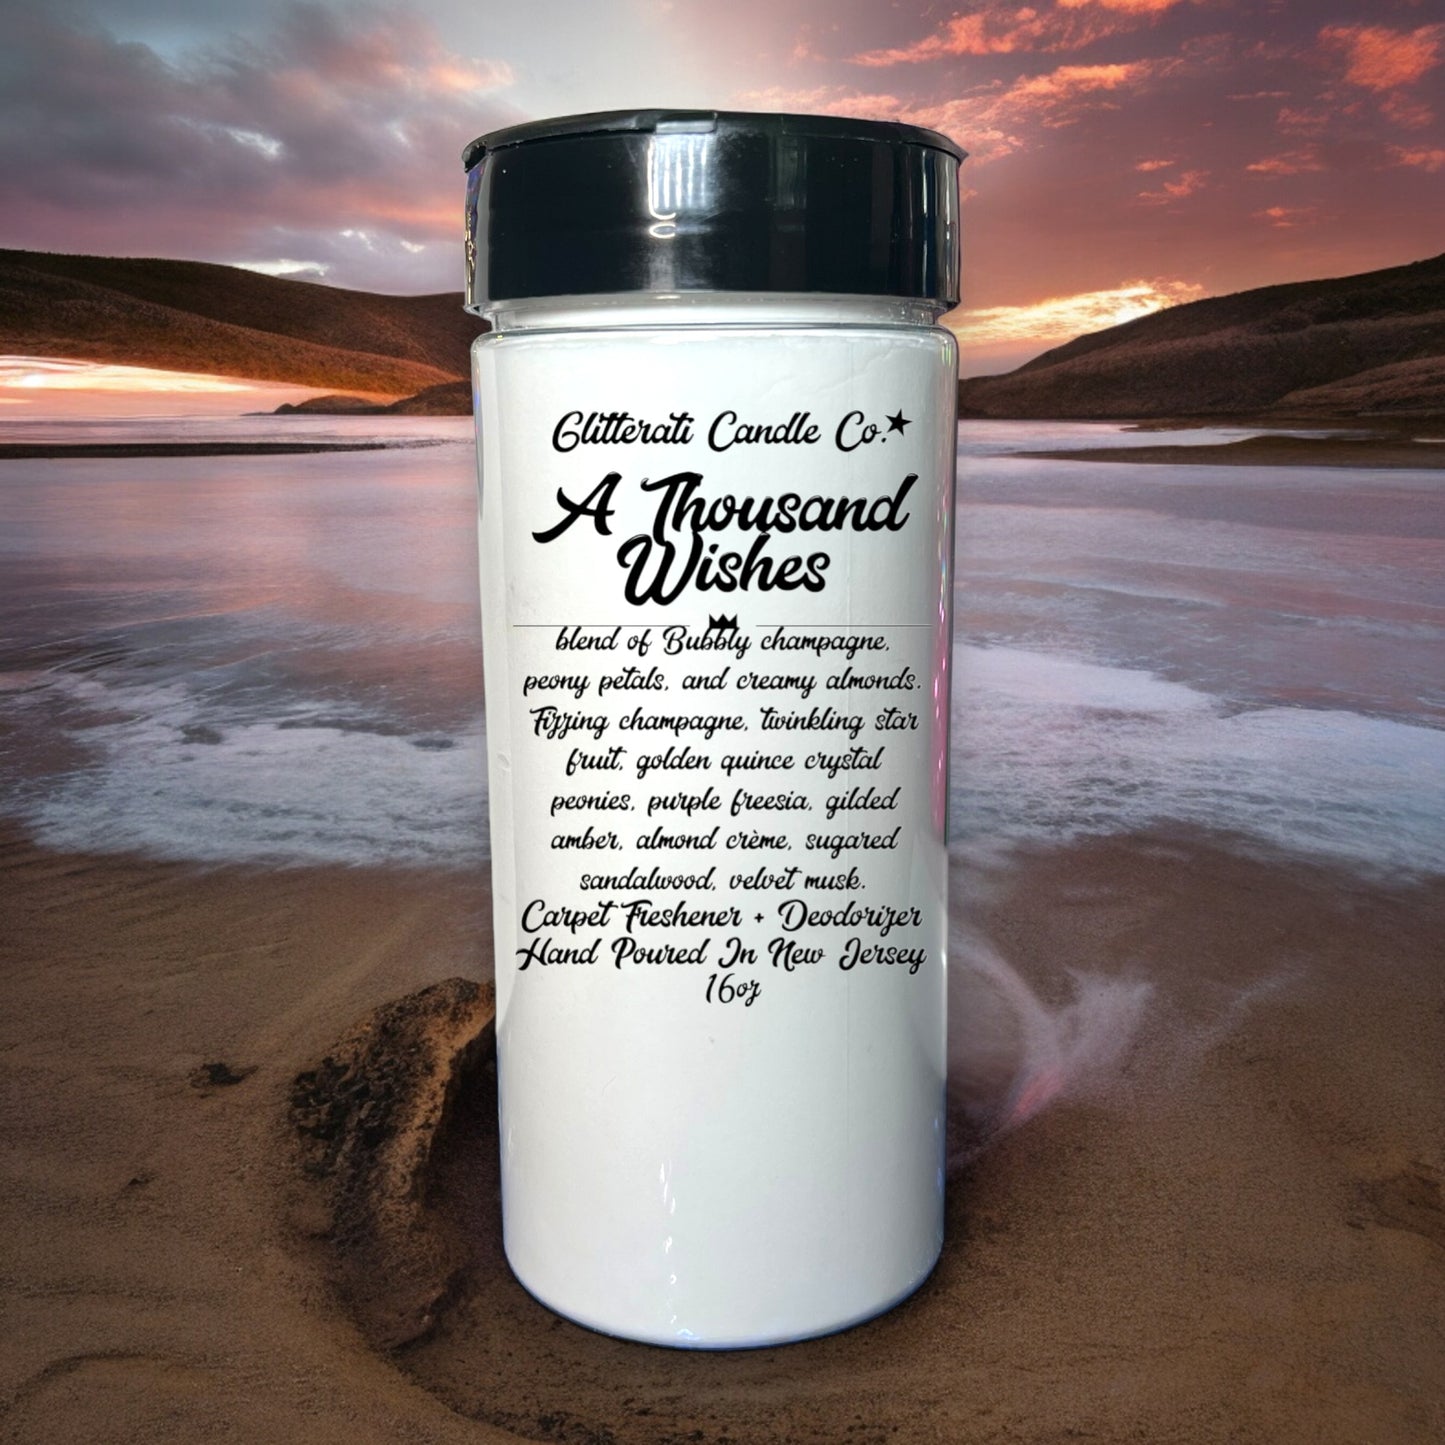 A Thousand Wishes - All Natural Heavily Scented Carpet Freshener & Deodorizer